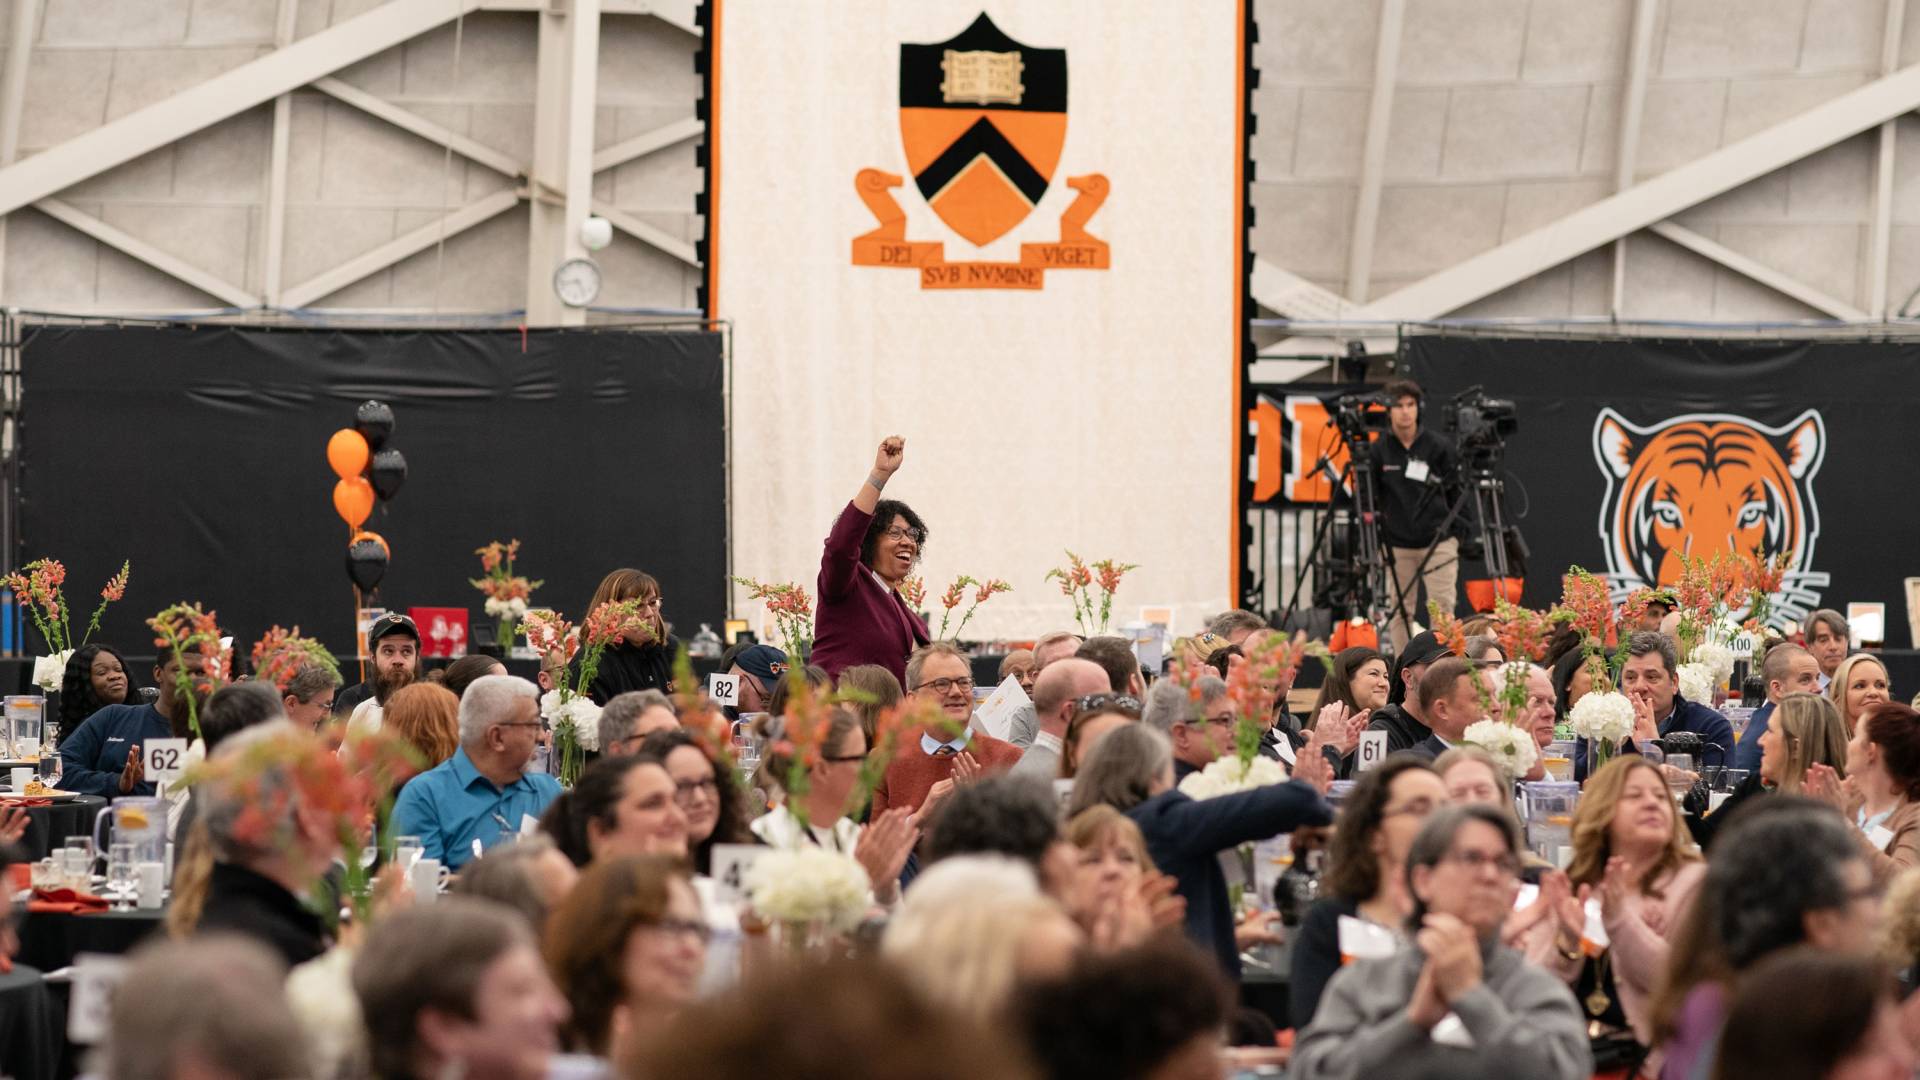 A staff member raises her hand in celebration during the service recognition luncheon